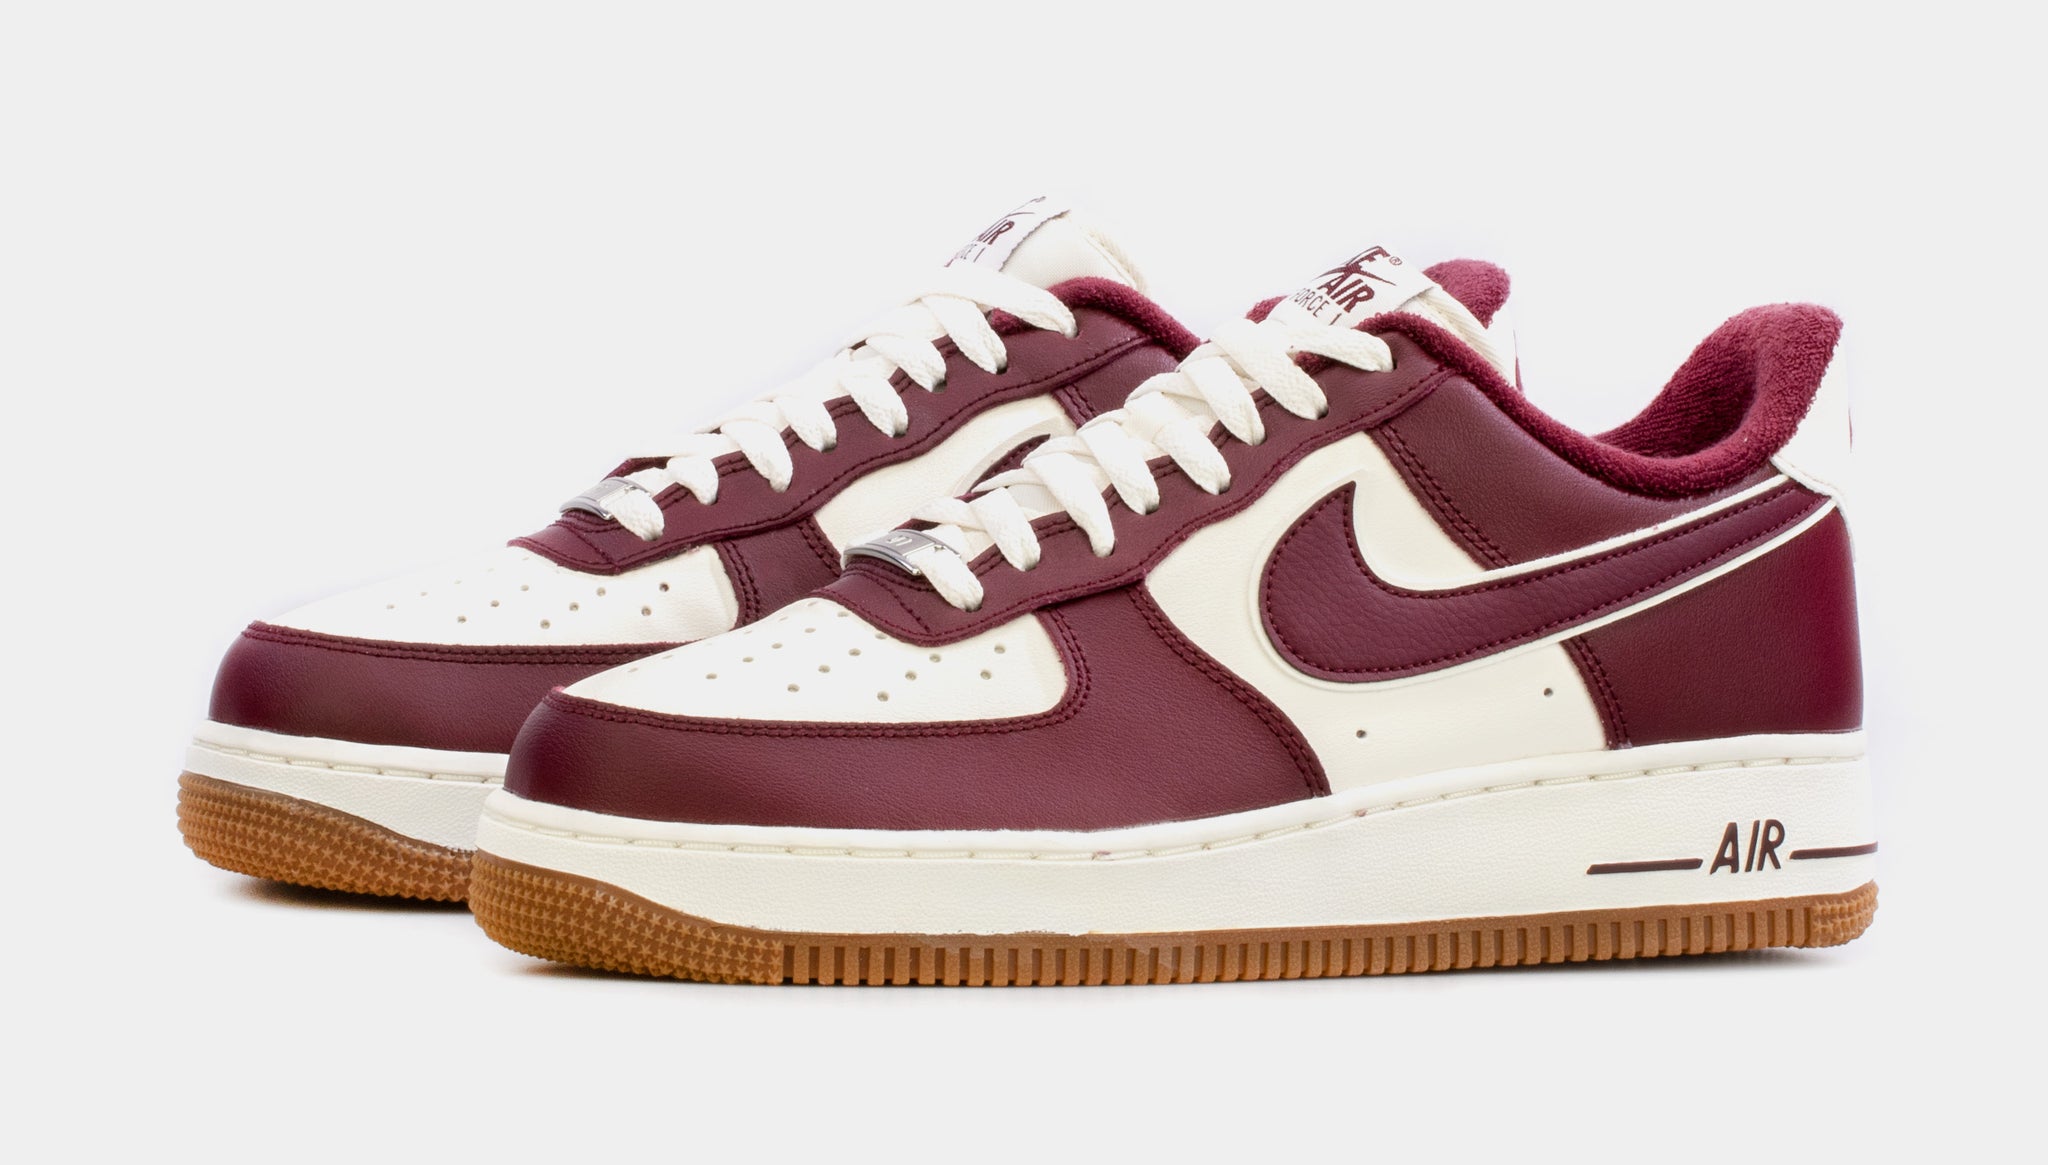 Nike Air Force 1 low maroon white size 10.5 men's (DQ7659-102)